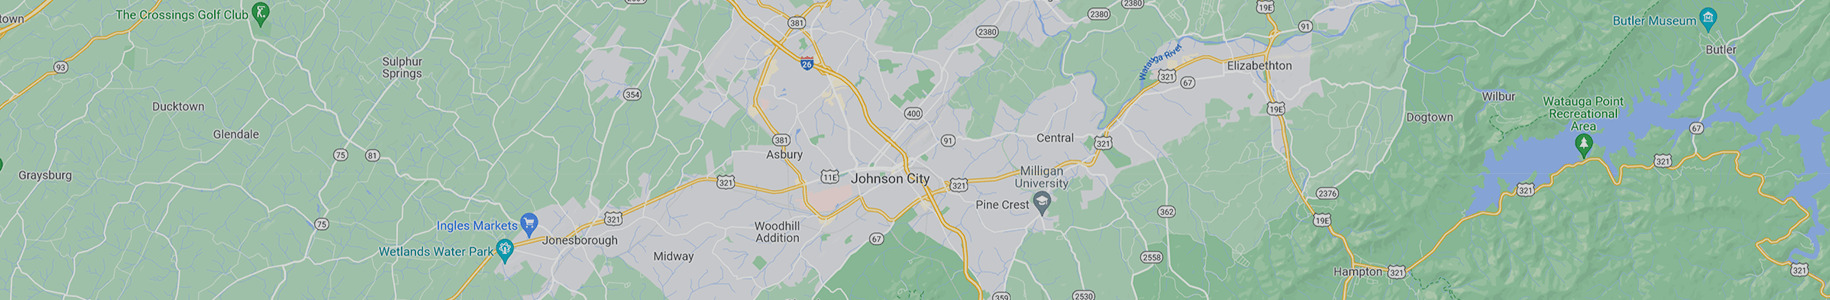 Johnson City - Bank of Tennessee - Branch Locations